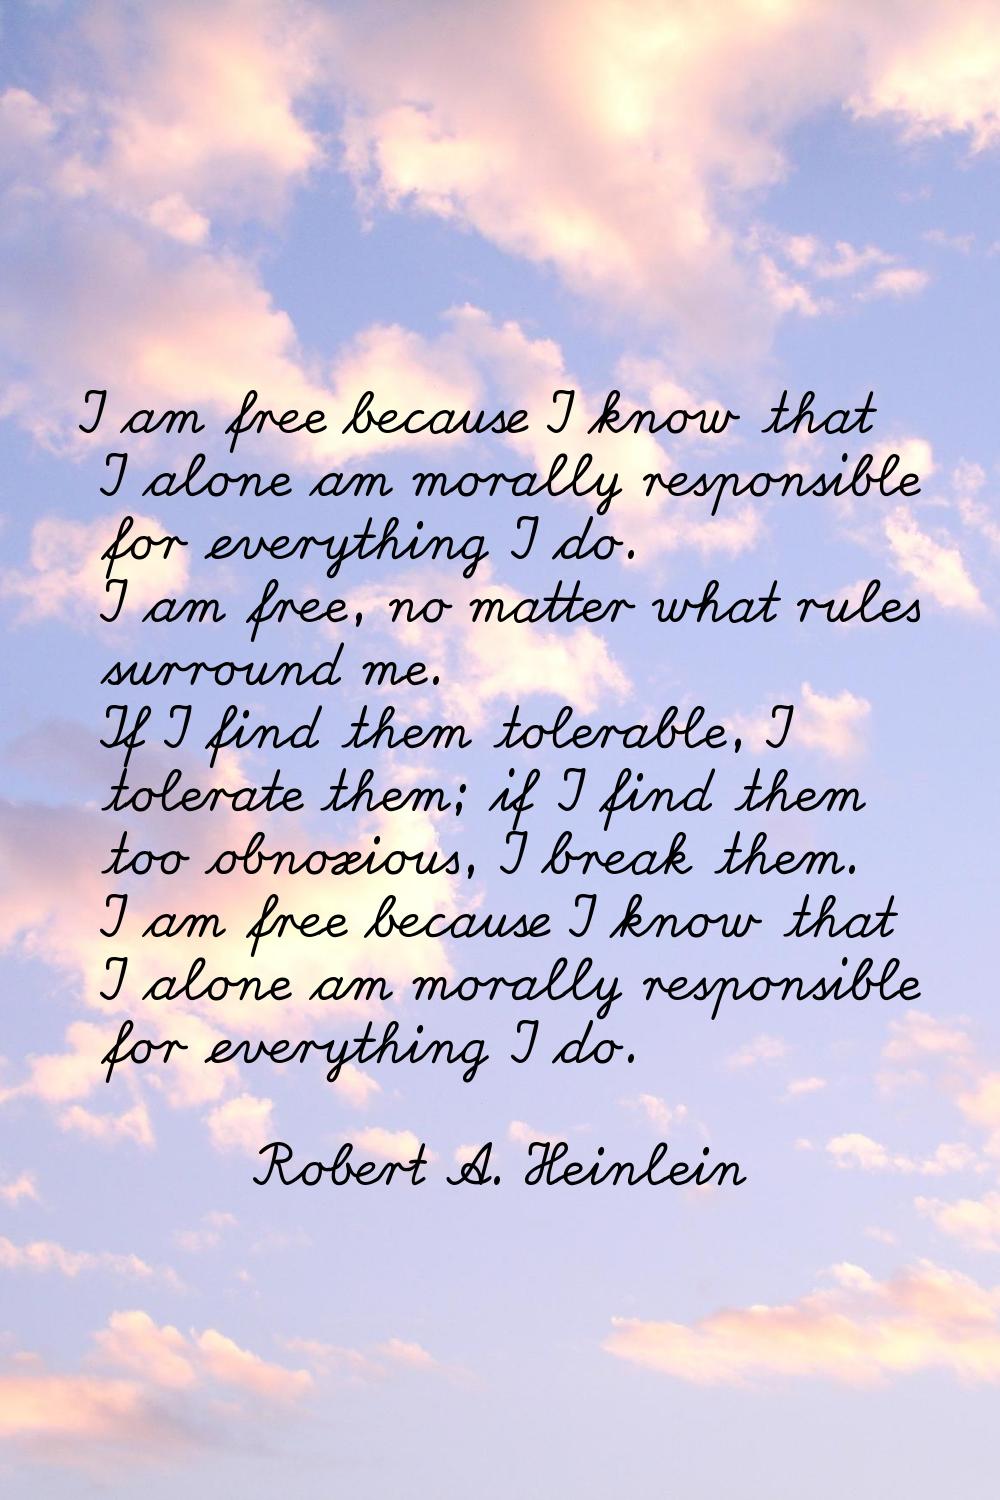 I am free because I know that I alone am morally responsible for everything I do. I am free, no mat